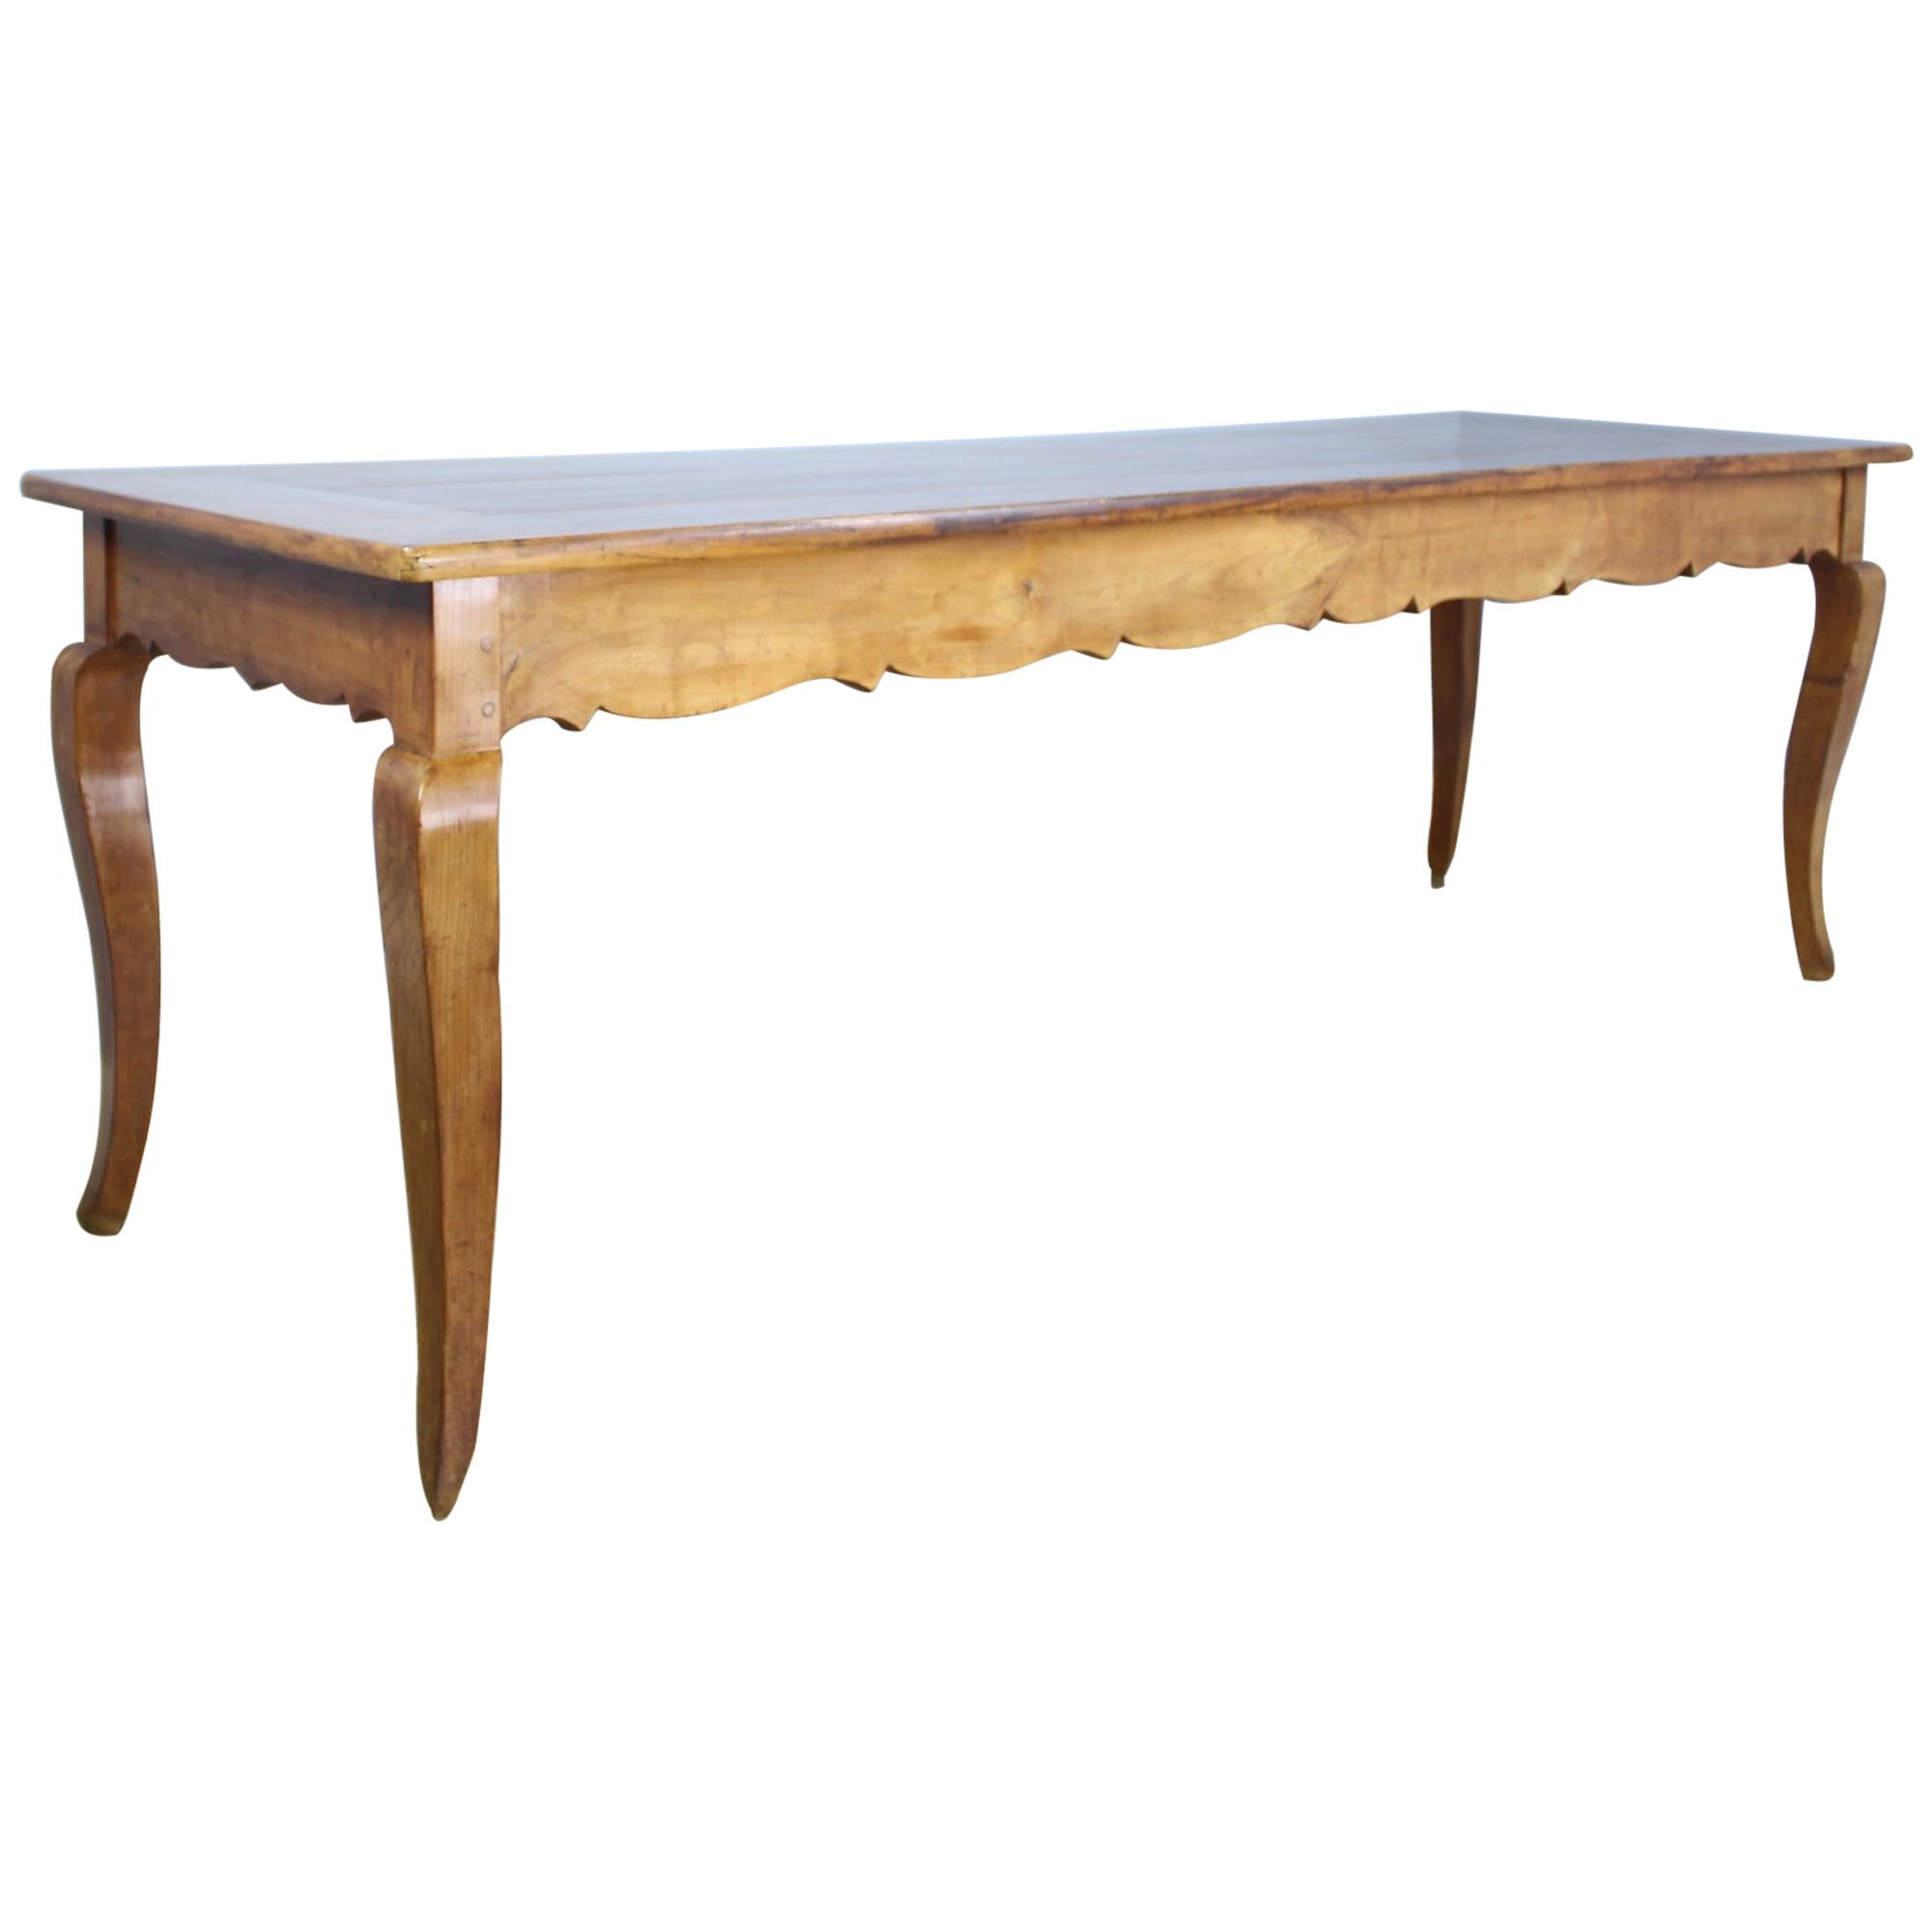 Antique Cabriole Leg Cherry Dining Table with Carved Apron For Sale